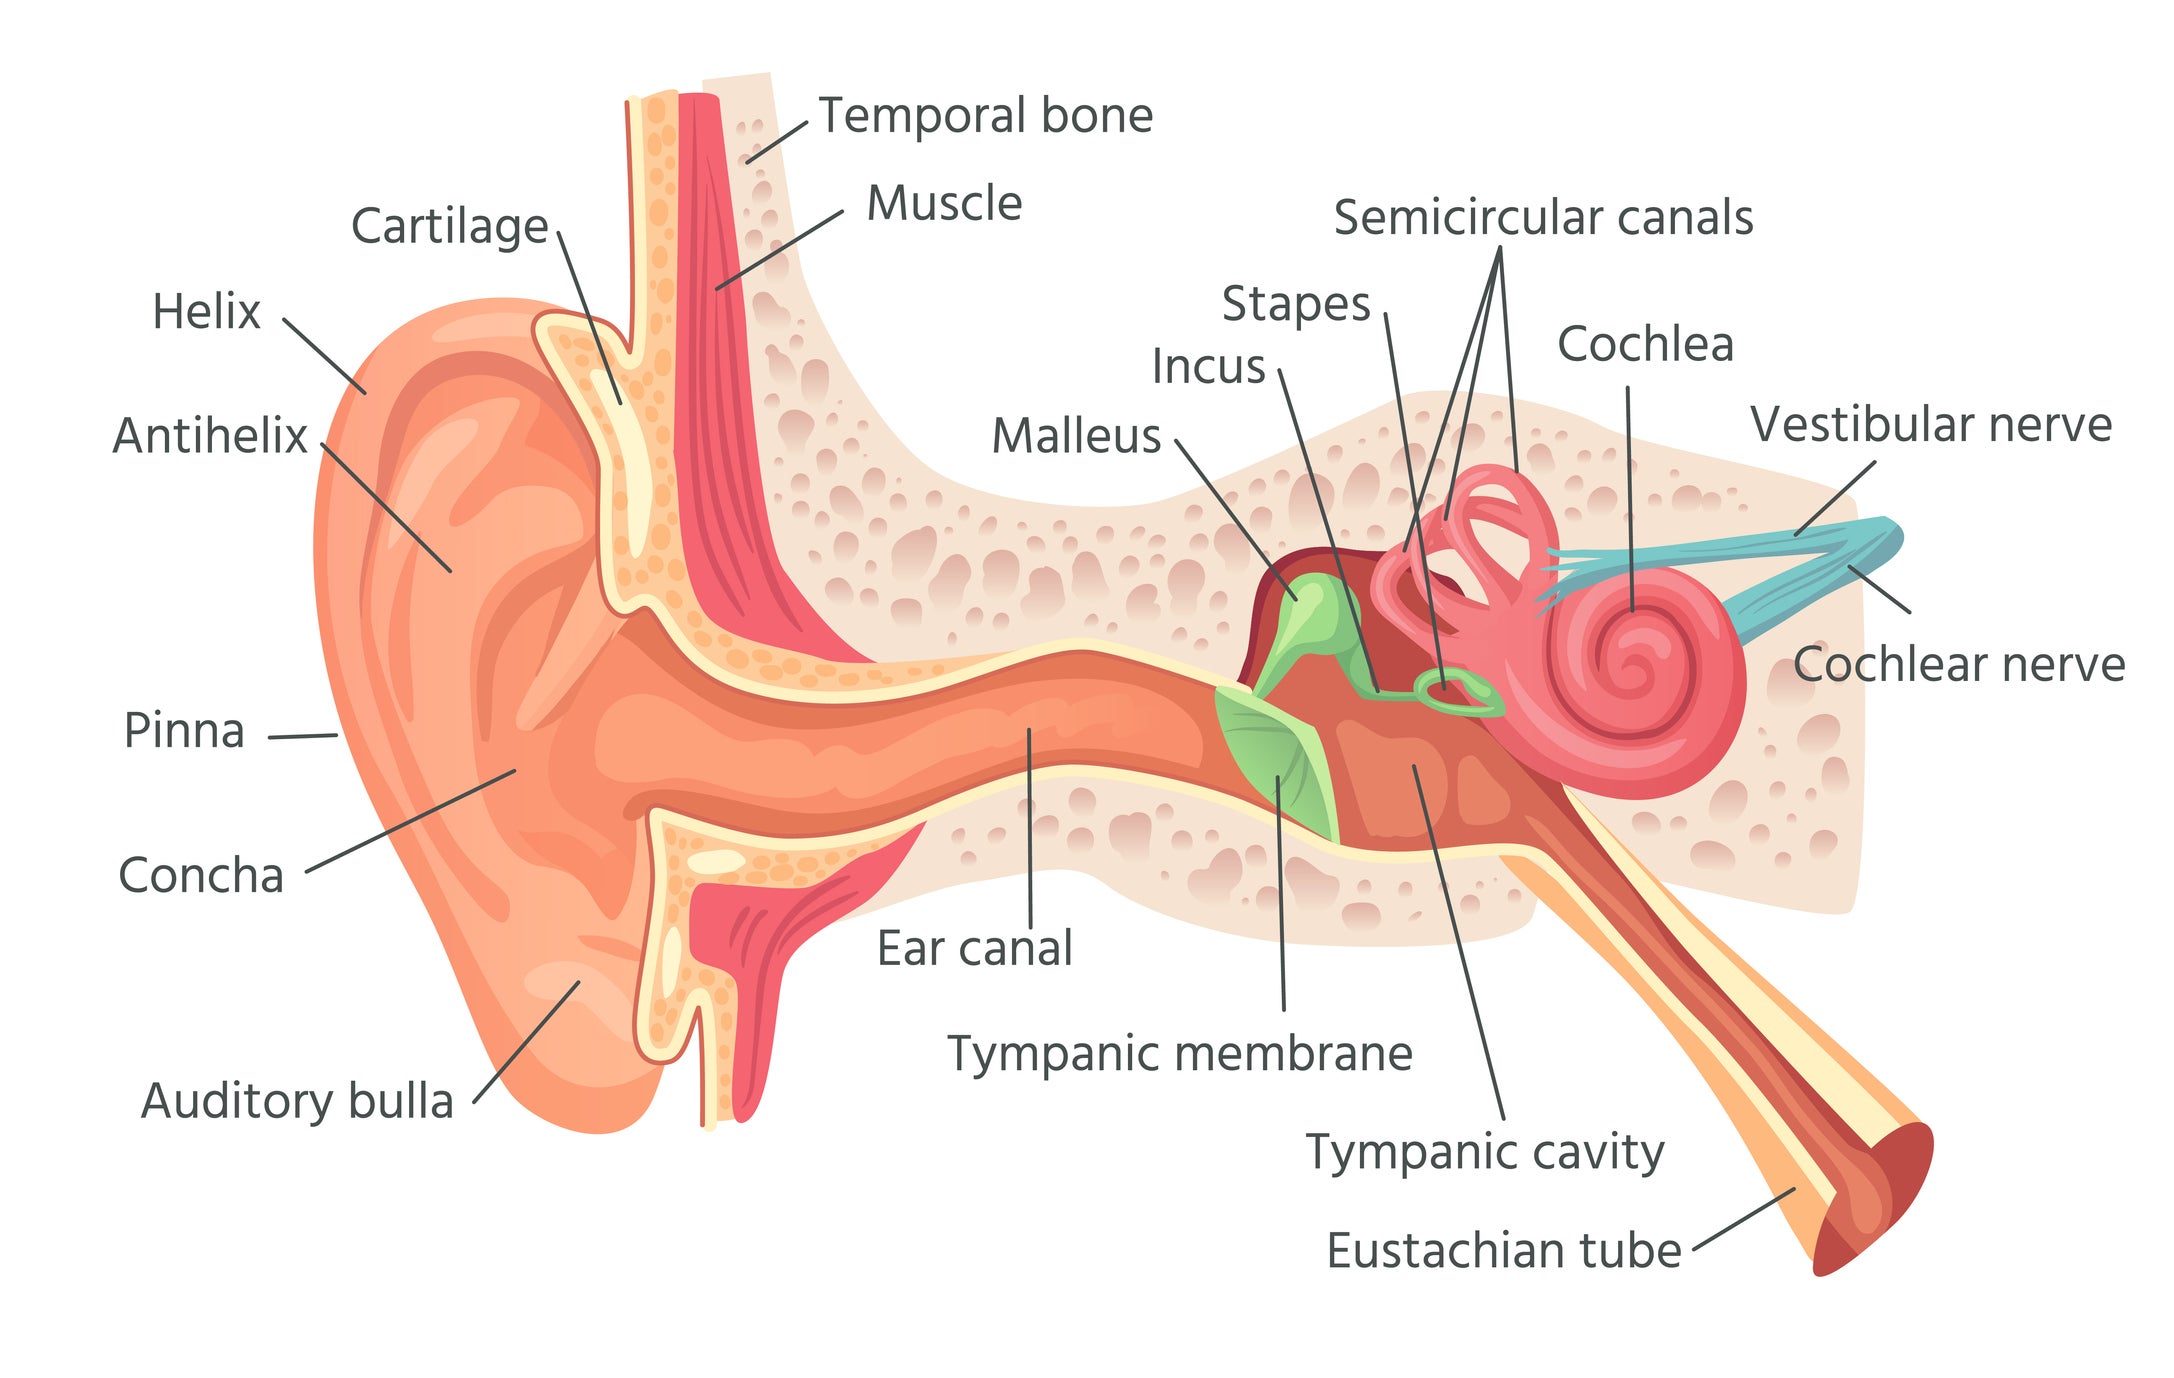 An educational graphic showing the inner structure of the human ear.